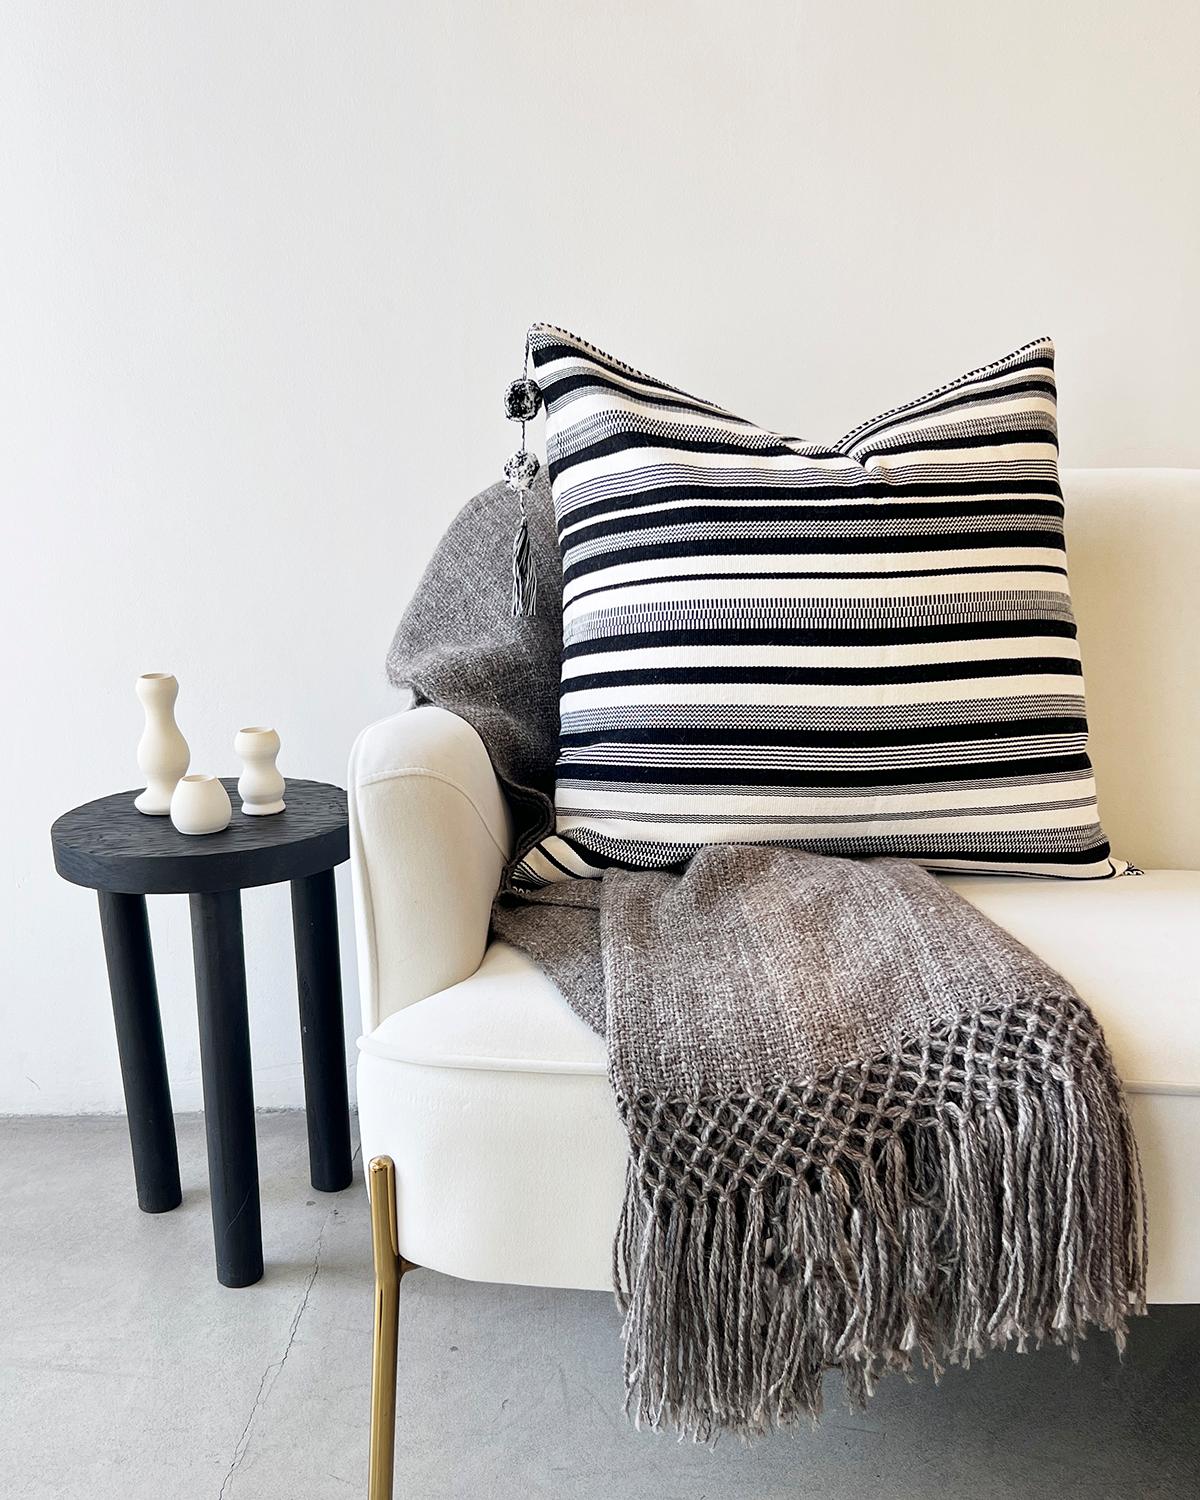 This premium striped throw pillow is crafted from a unique blend of black and white. The contrasting pattern coordinates well with rustic, Latin American decor, bringing a touch of style to any home. Fair trade sourced from local artisans, the